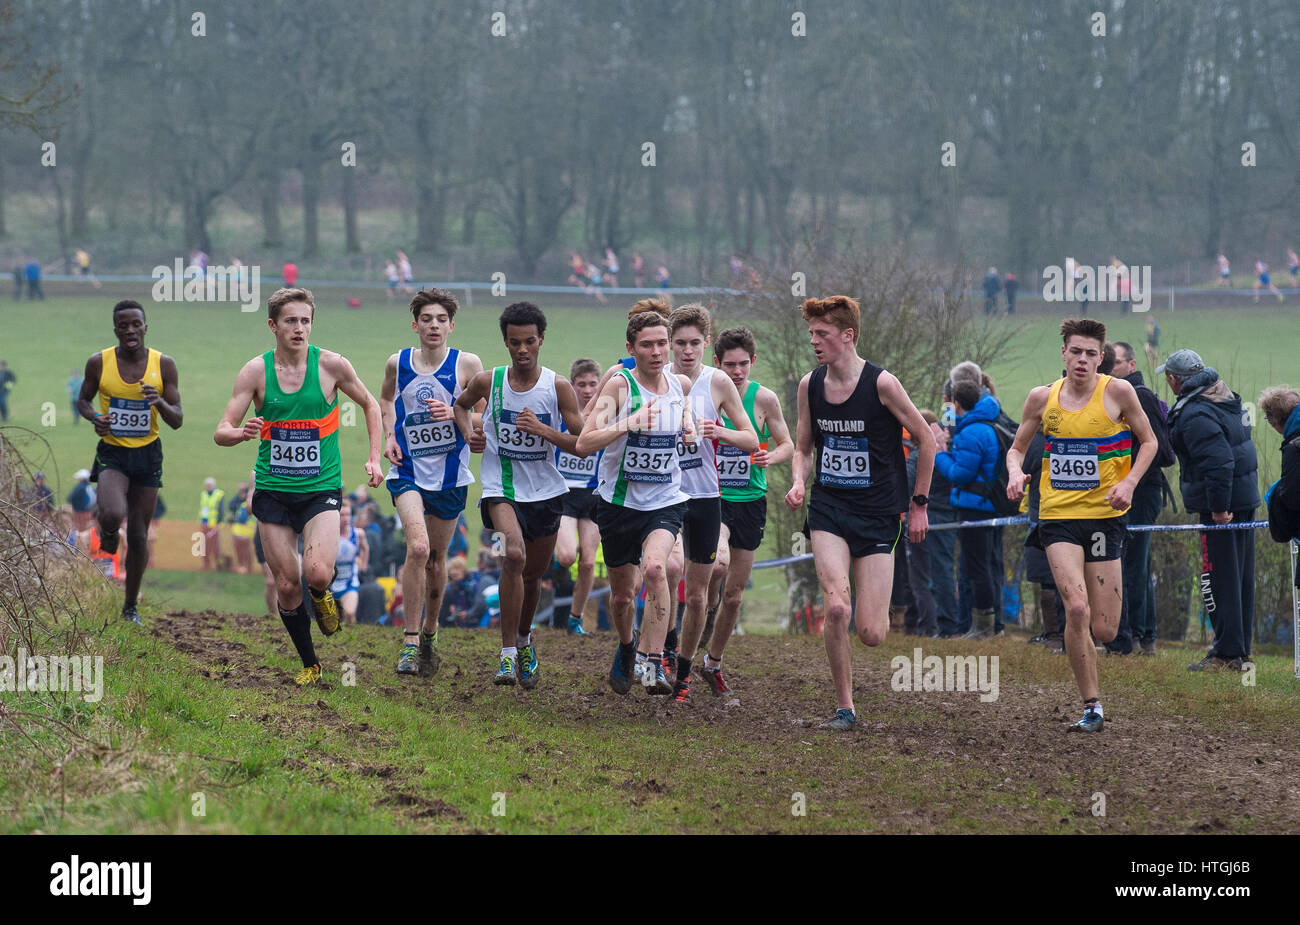 Prestwold Hall, Loughborough 11 March, Zak Mahamed (3351) on his way to winning the U17 Men's race at the British Athletics Inter Counties Cross Country Championships incorporating World Junior Trials and Cross Challenge Final, Prestwold Hall, Loughborough, Saturday 11th March 2017 Credit: Gary Mitchell/Alamy Live News Stock Photo